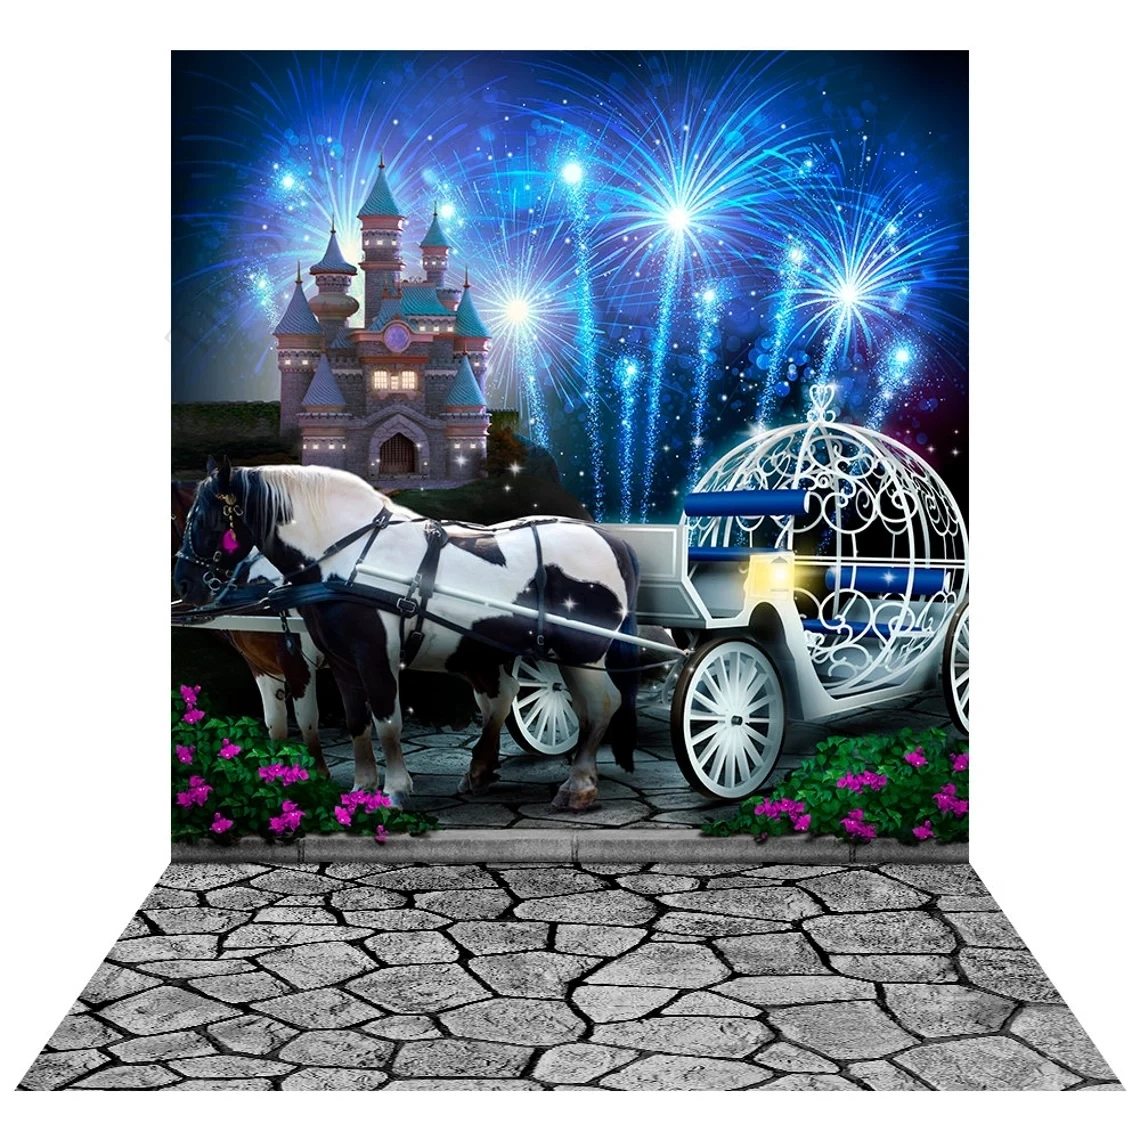 Fairy Tale Castle Princess Backdrop for Photography Props Pumpkin Carriage Cinderella Firework New Year Background Wedding Decor enlarge